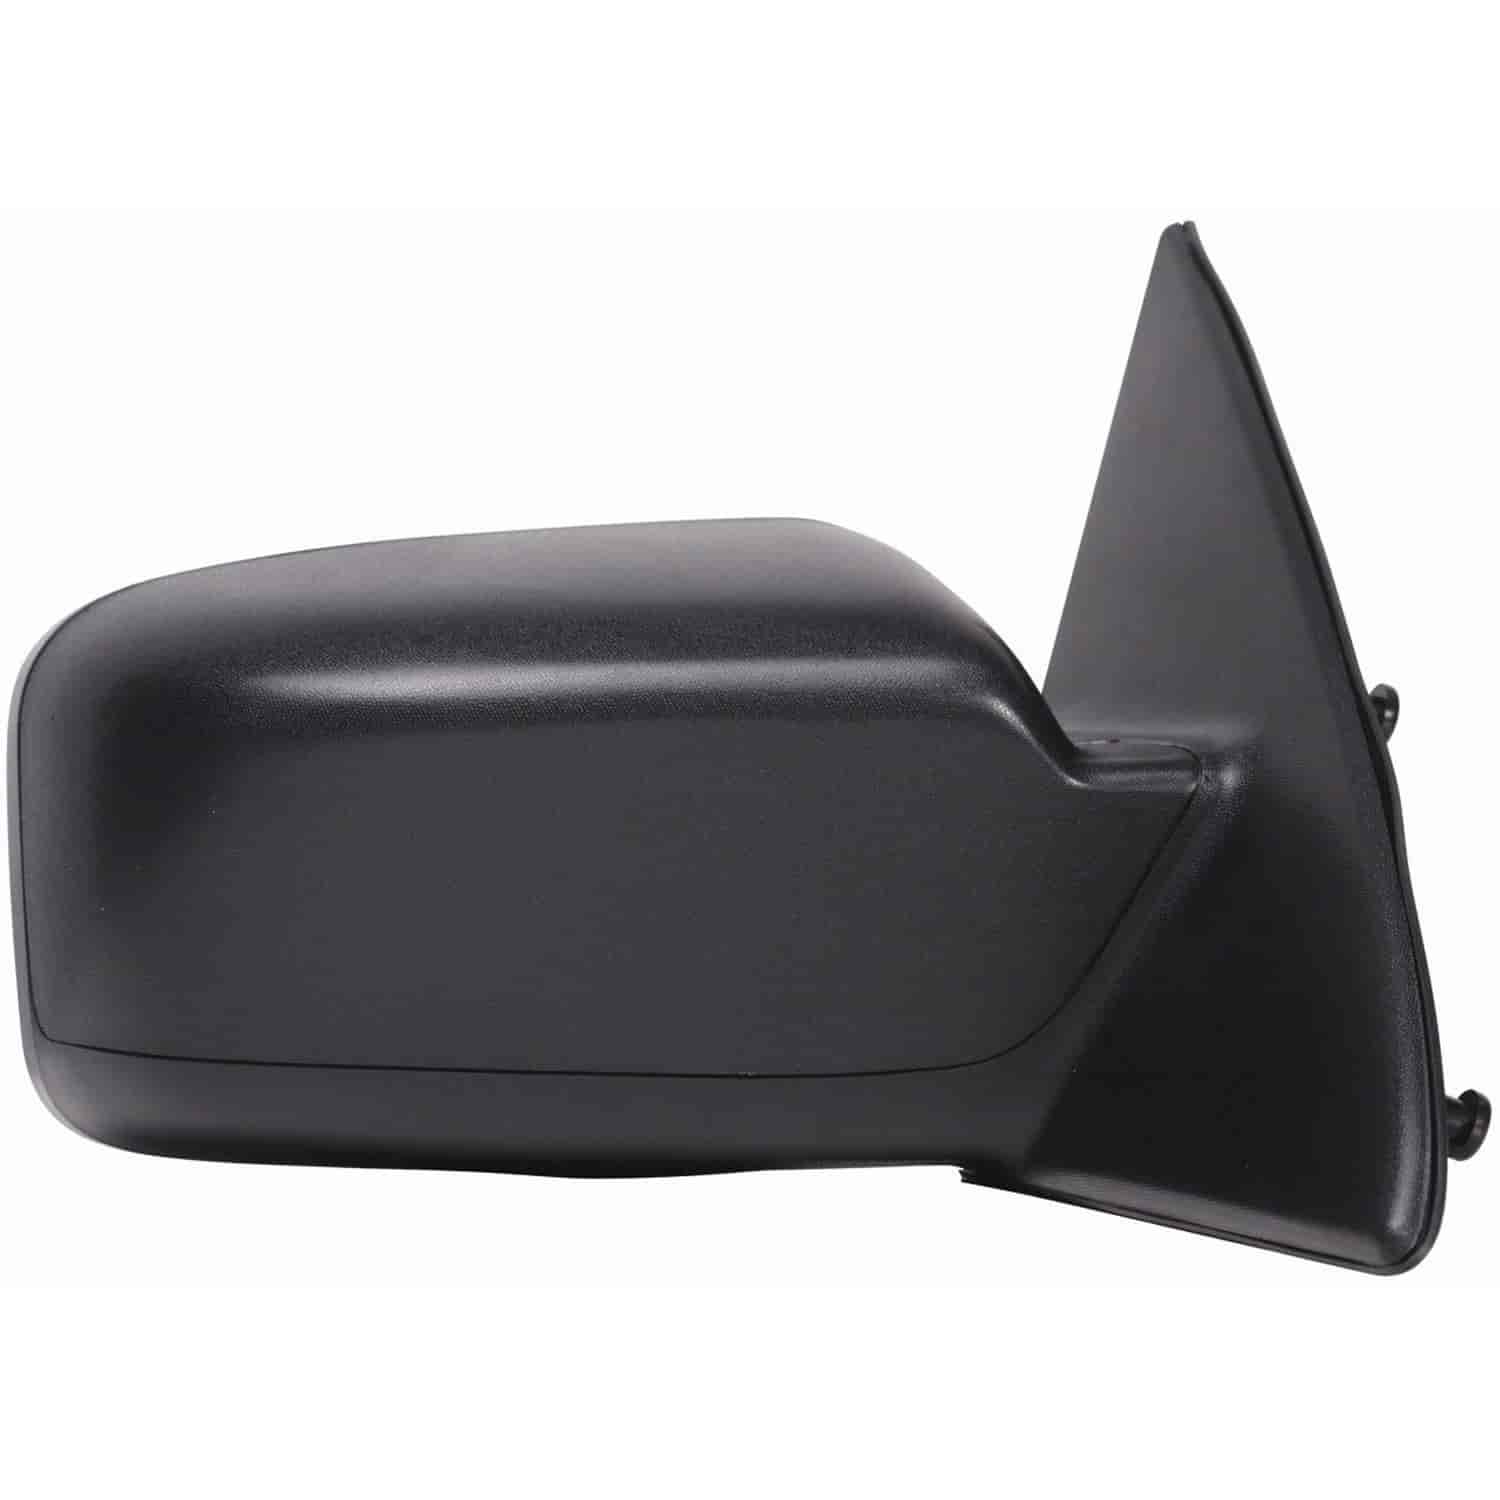 OEM Style Replacement mirror for 06-12 Ford Fusion 06-10 Mercury Milanw/paint to match w/o puddle la